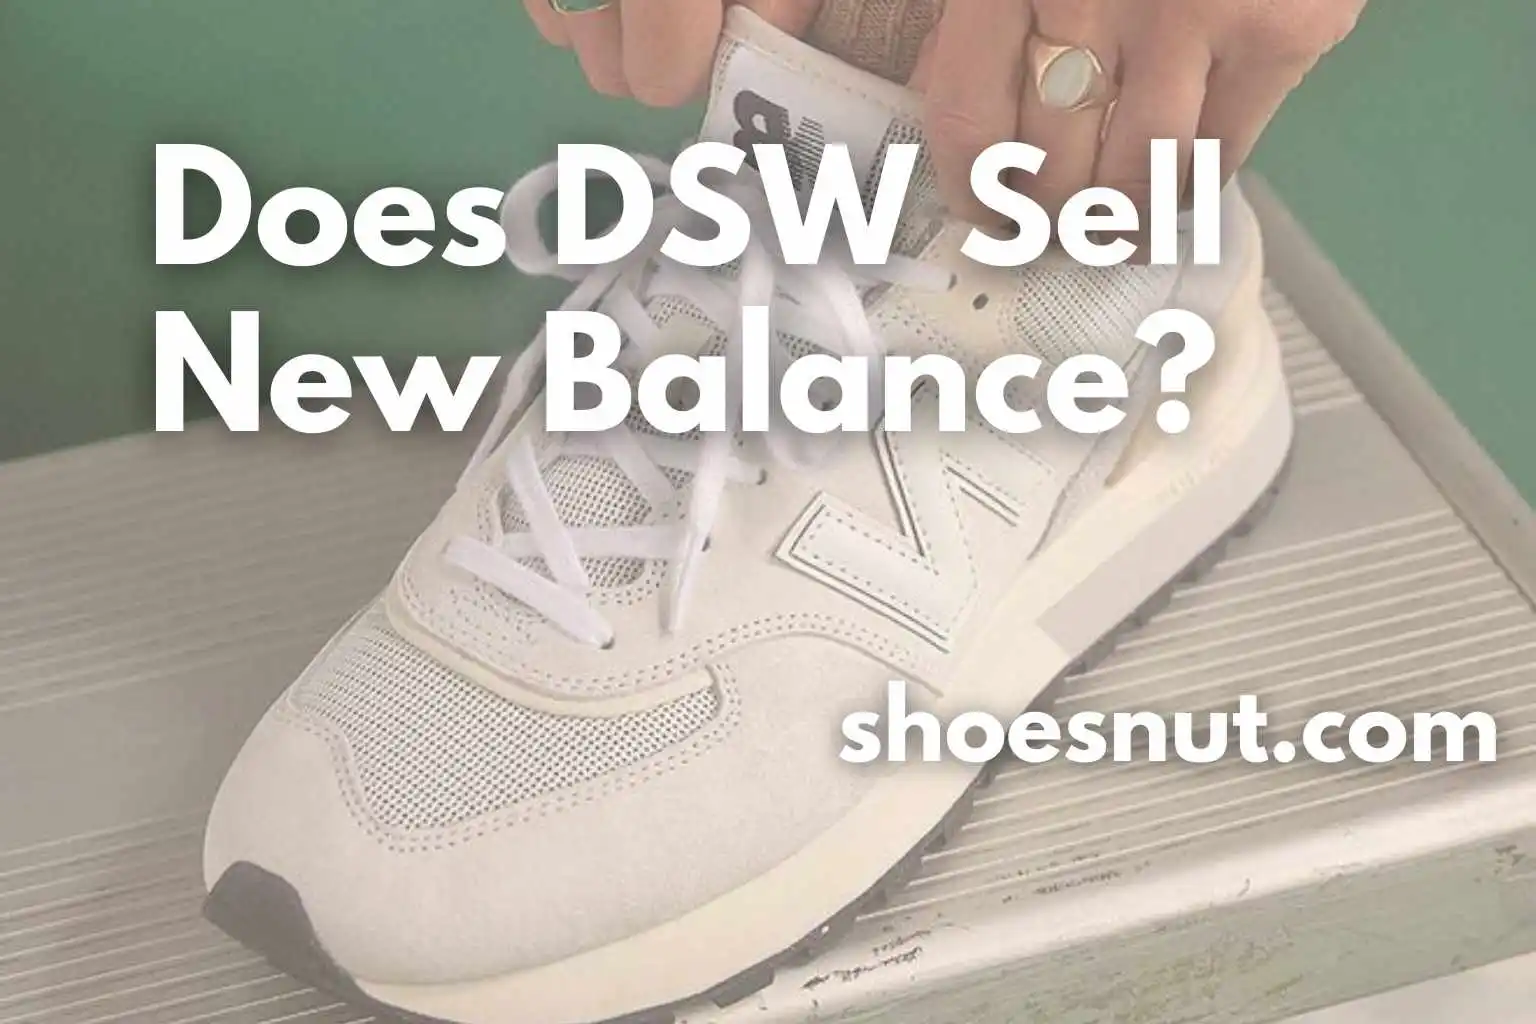 Does DSW Sell New Balance?